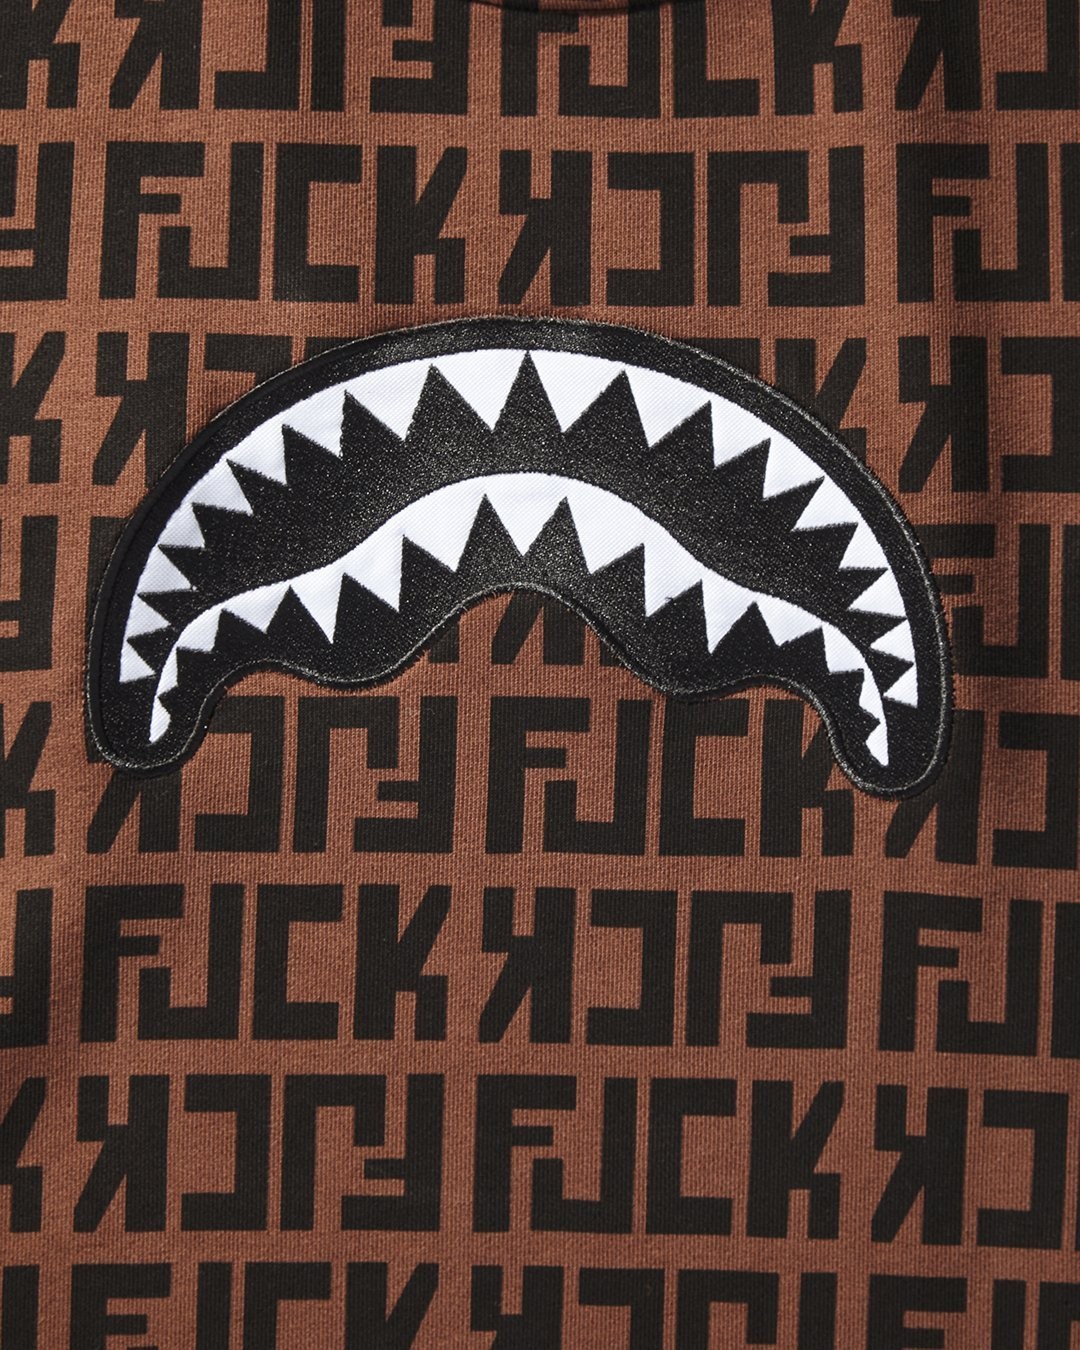 HOT SALE ☆☆☆ OFFENDED SHARK CREW - HOT SALE ☆☆☆ OFFENDED SHARK CREW-01-4